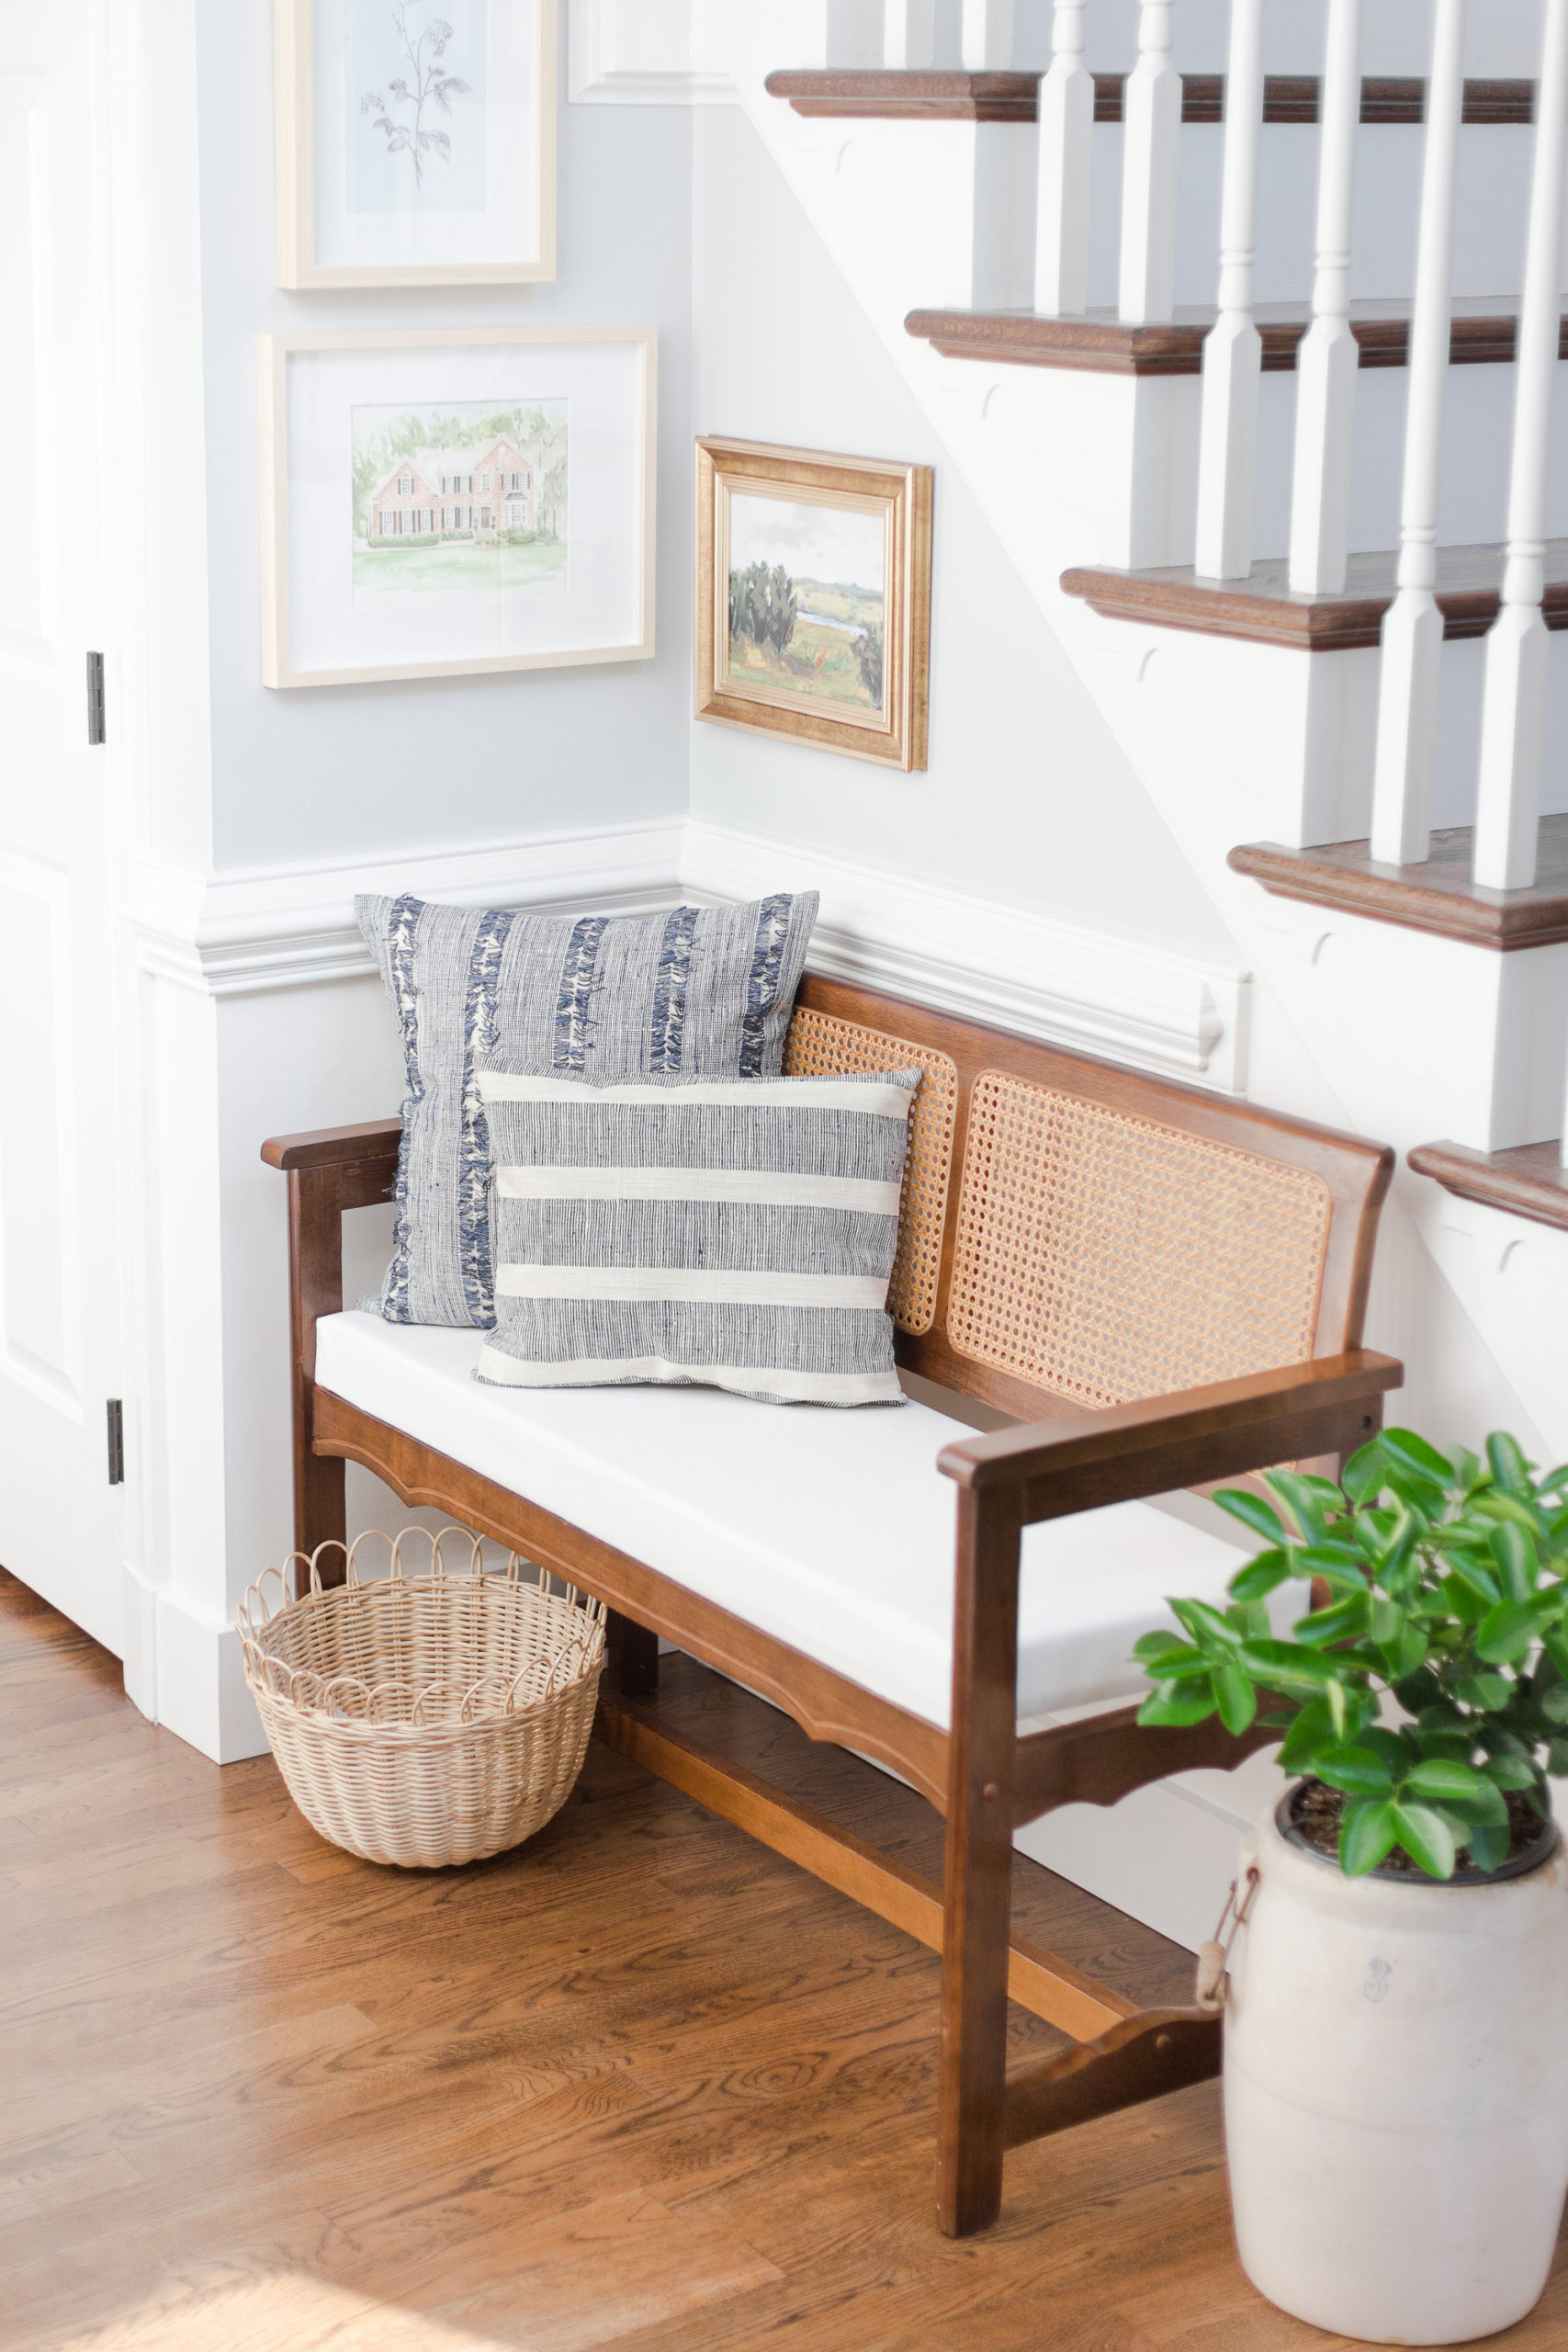 Entryway with cane bench, pillows, next to a staircase with green plant in pot on floor next to bench